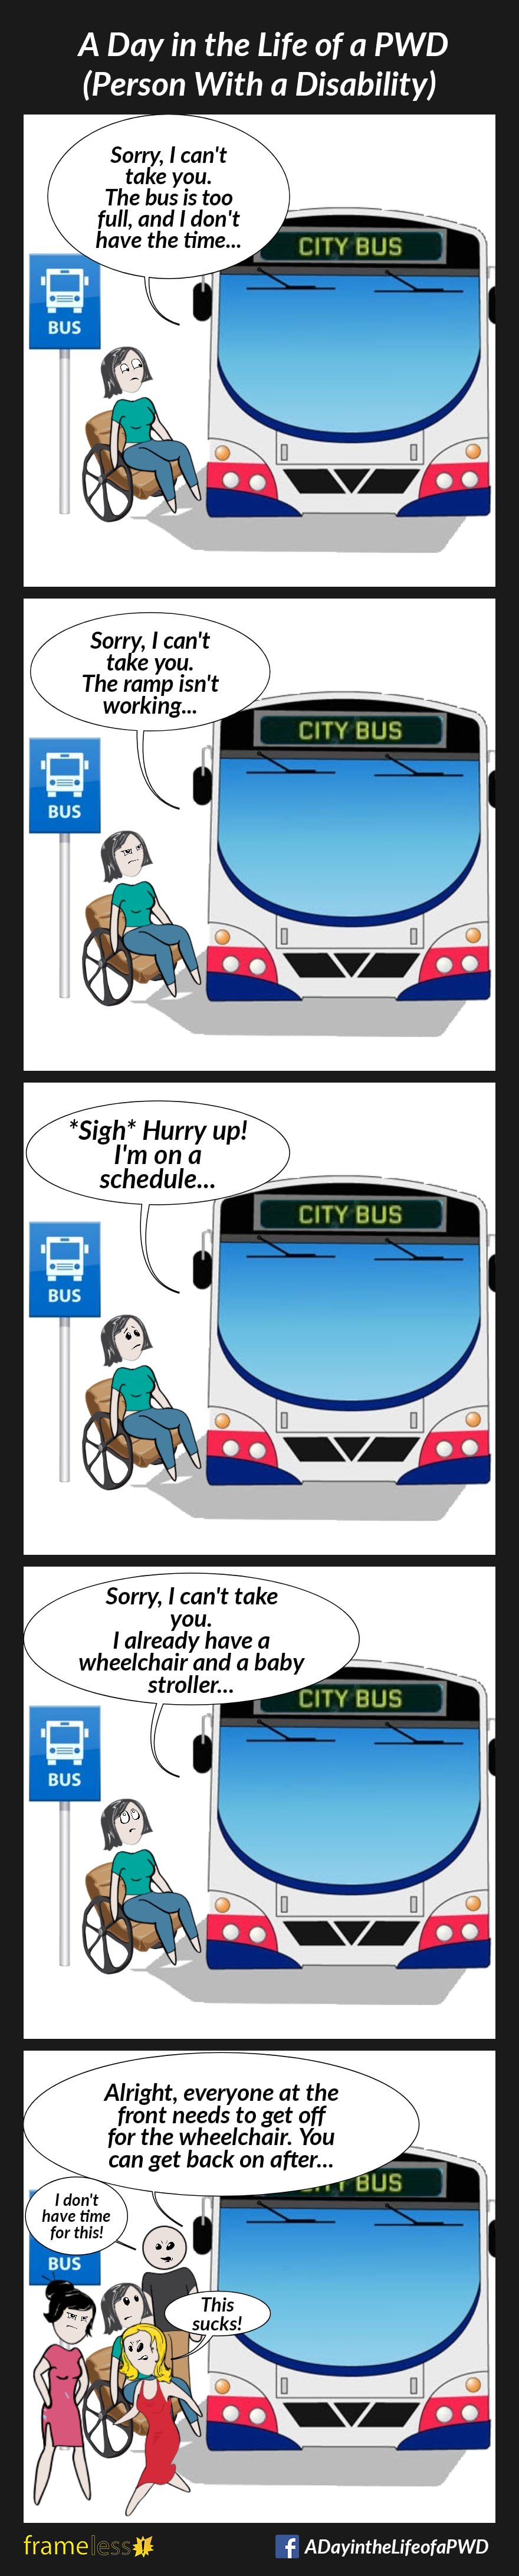 COMIC STRIP 
A Day in the Life of a PWD (Person With a Disability) 

Frame 1:
A woman in a wheelchair is preparing to board a bus.
DRIVER: Sorry, I can't take you. The bus is too full, and I don’t have the time.

Frame 2:
Another day, the woman is preparing to board a bus.
DRIVER: Sorry, I can't take you. The ramp is not working.

Frame 3: 
Another day, the woman is preparing to board a bus.
DRIVER: *Sigh* Hurry up! I'm on a schedule. 

Frame 4:
Another day, the woman is preparing to board a bus.
DRIVER: Sorry, I can't take you. I already have a wheelchair and a baby stroller.

Frame 5:
Another day, the woman is preparing to board a bus. 
DRIVER: Alright, everyone at the front needs to get off for the wheelchair. You can get back on after.
Passengers get off the bus, giving the woman dirty looks and making angry comments.
